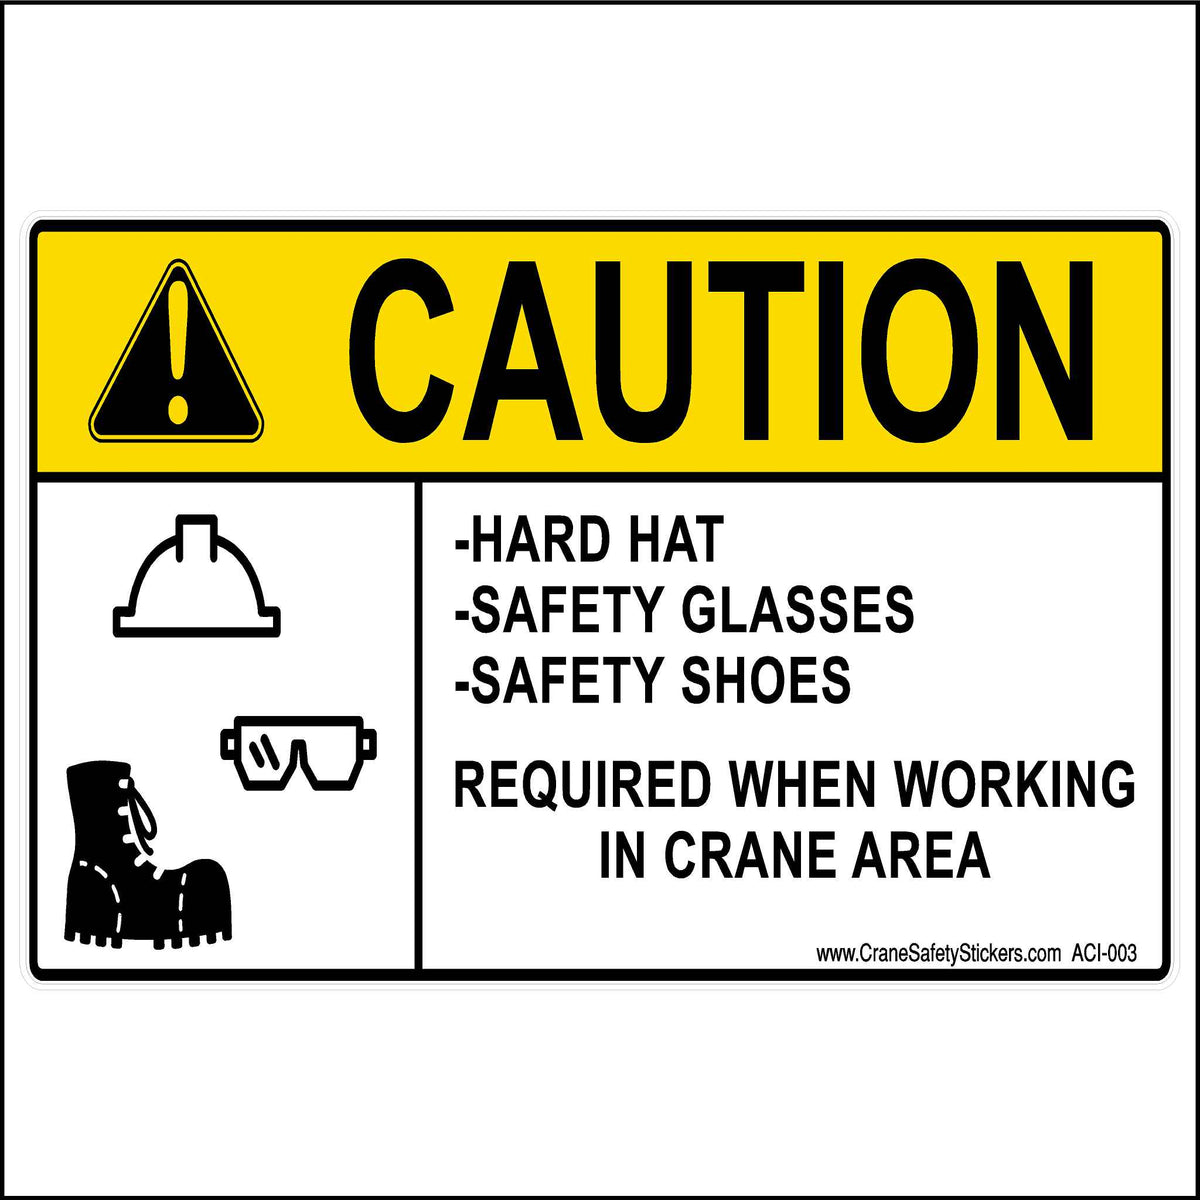 Caution Sign printed with, Caution Hard Hat Safety Glasses Safety Shoes Required When Working In Crane Area. 12 inches by 18 inches in size.